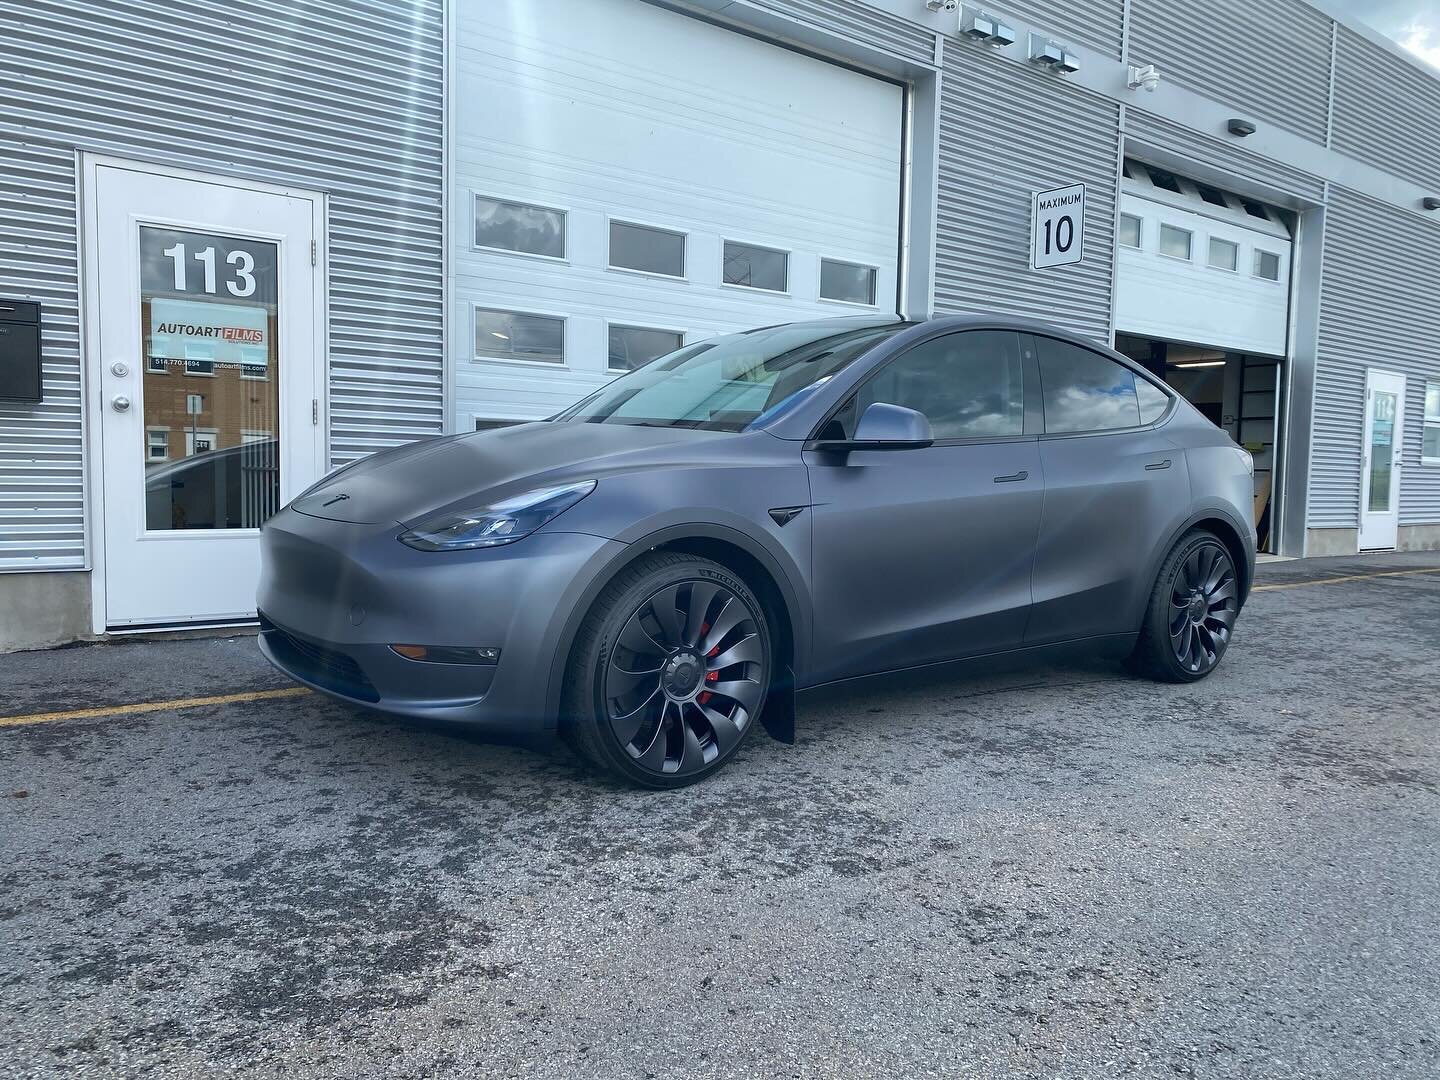 Unleashing the sleek power of this Tesla Model Y, shielded in Stealth PPF. Elevating style with cutting-edge protection. ⚡✨ #Tesla #AutoArt #AutoArtFilms #StealthPPF #ev #ppf